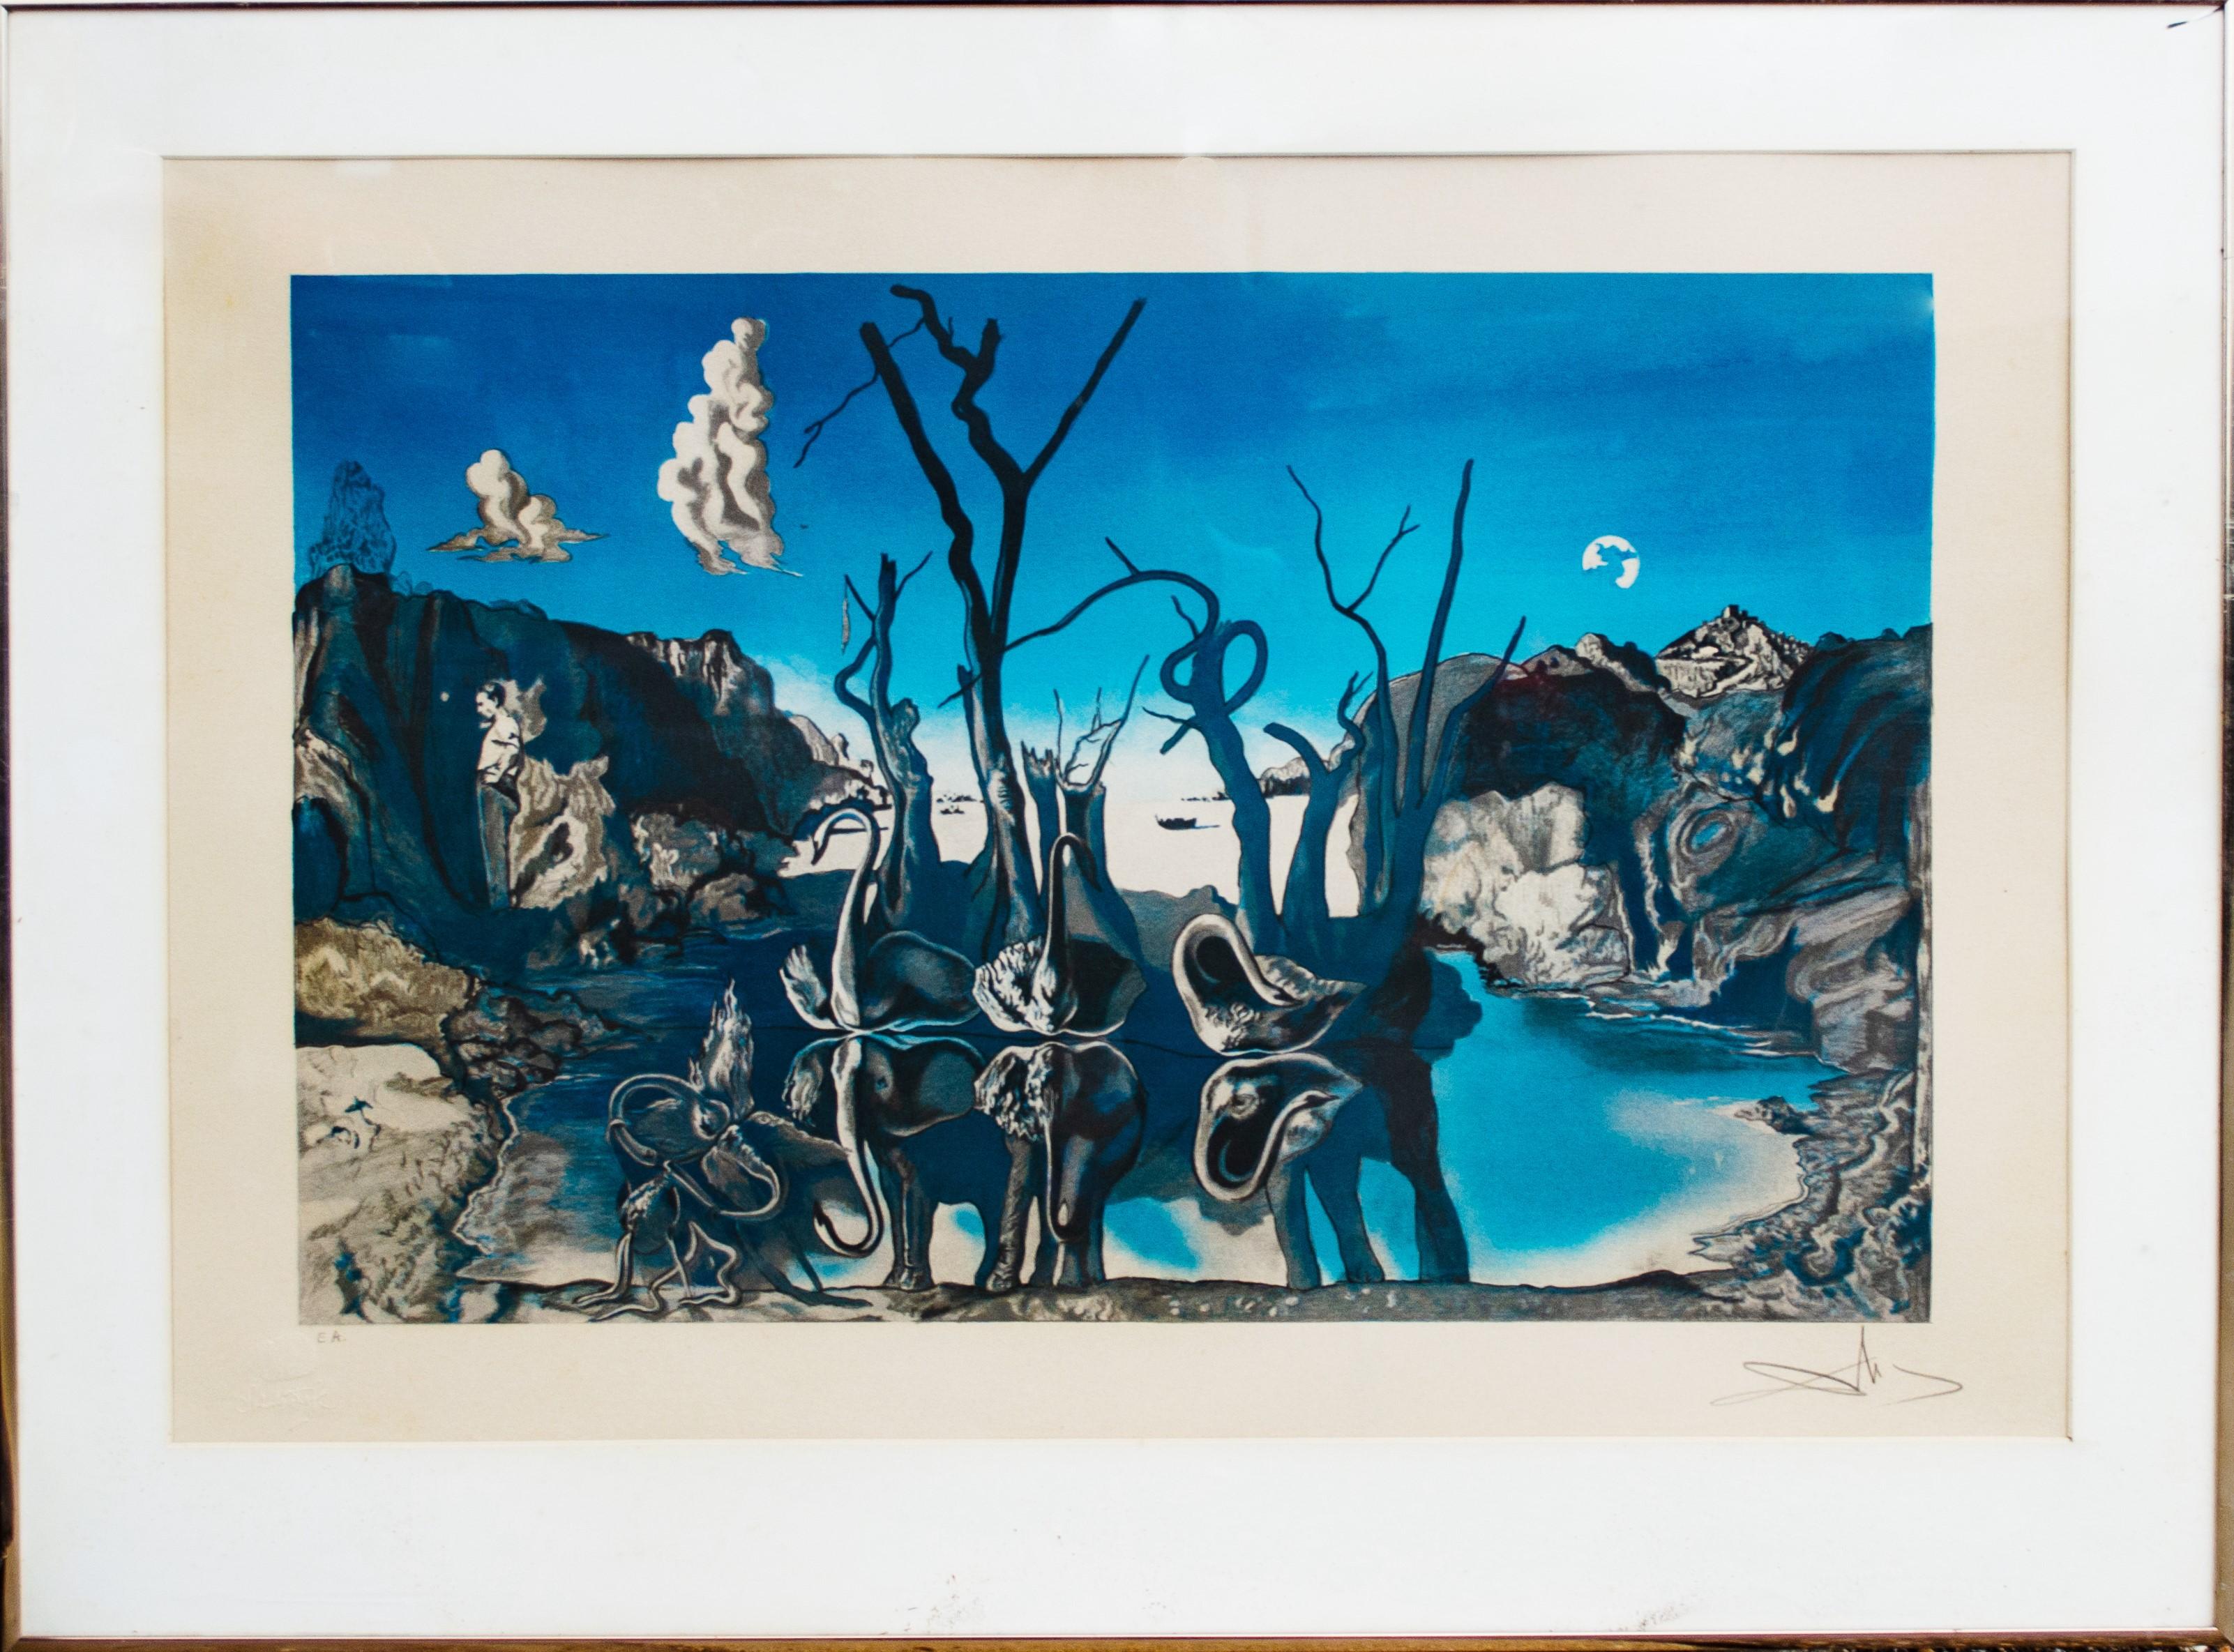 Salvador Dalí (Spanish, 1904-1989)
Swans Reflecting Elephants, 1970
Color lithograph
Sight: 18 x 26 1/2 in.
Framed: 23 1/4 x 31 1/4 in.
Signed lower right
Inscribed EA lower left
Edition of 300 + EA ('EA' refers to 